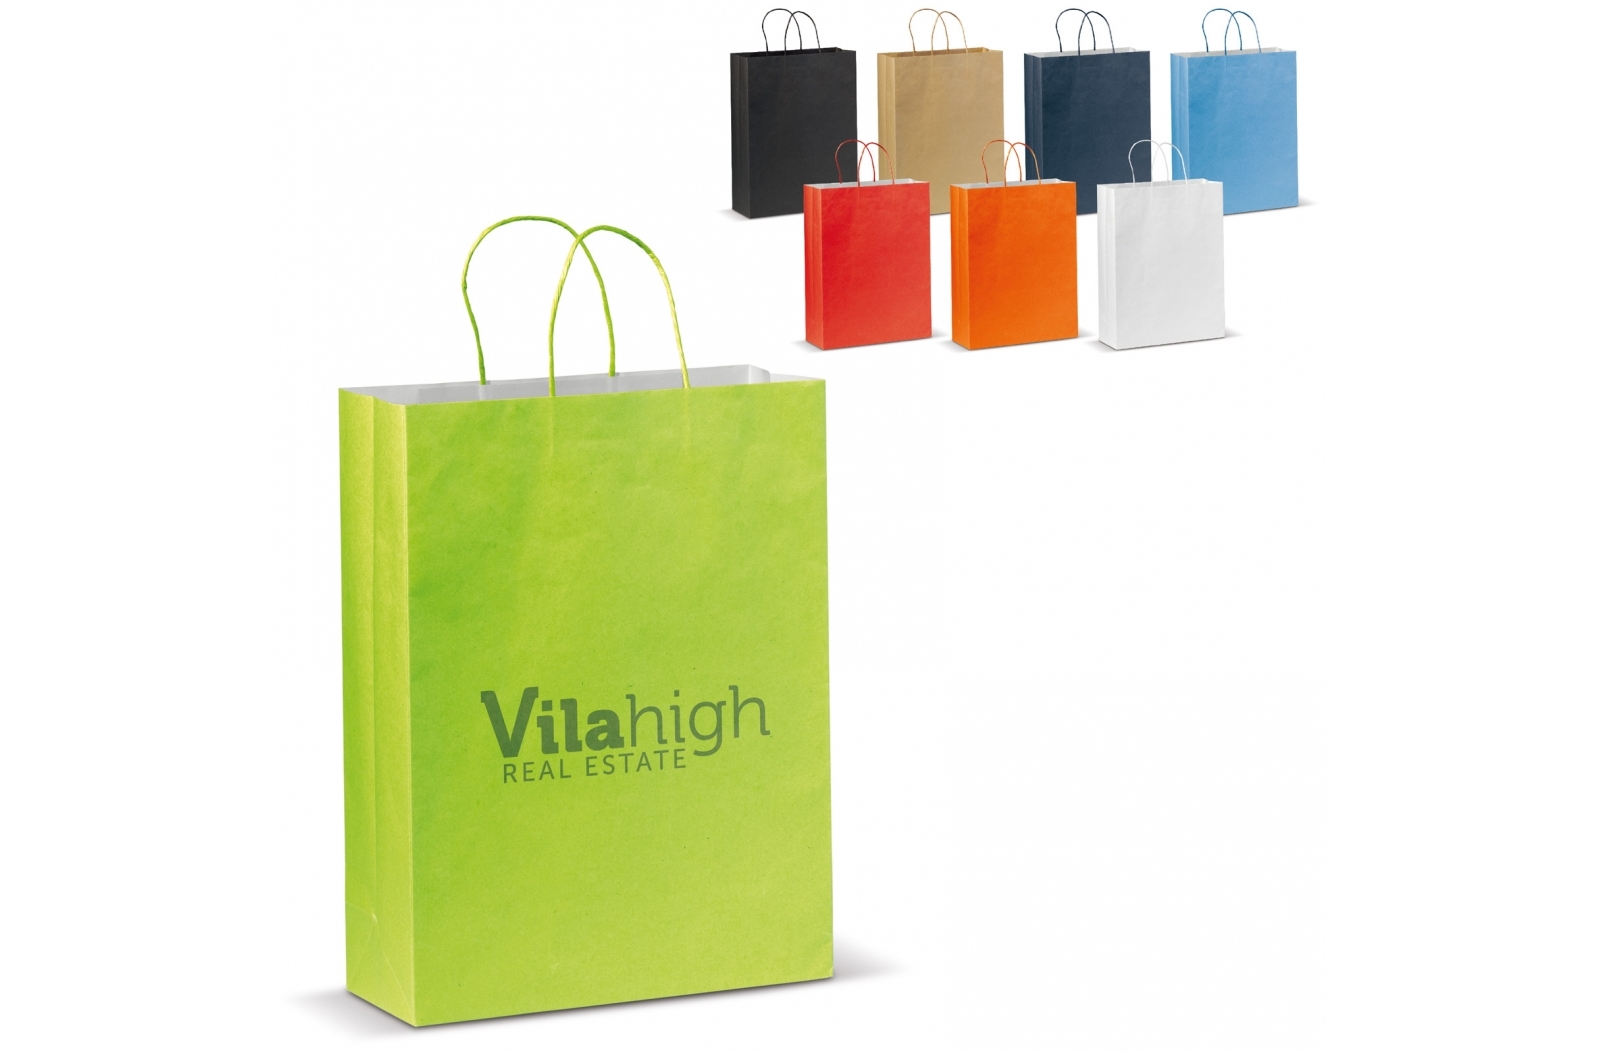 This is a large carrier bag made from eco-friendly matte paper. It also comes with twisted paper handles. - Goole